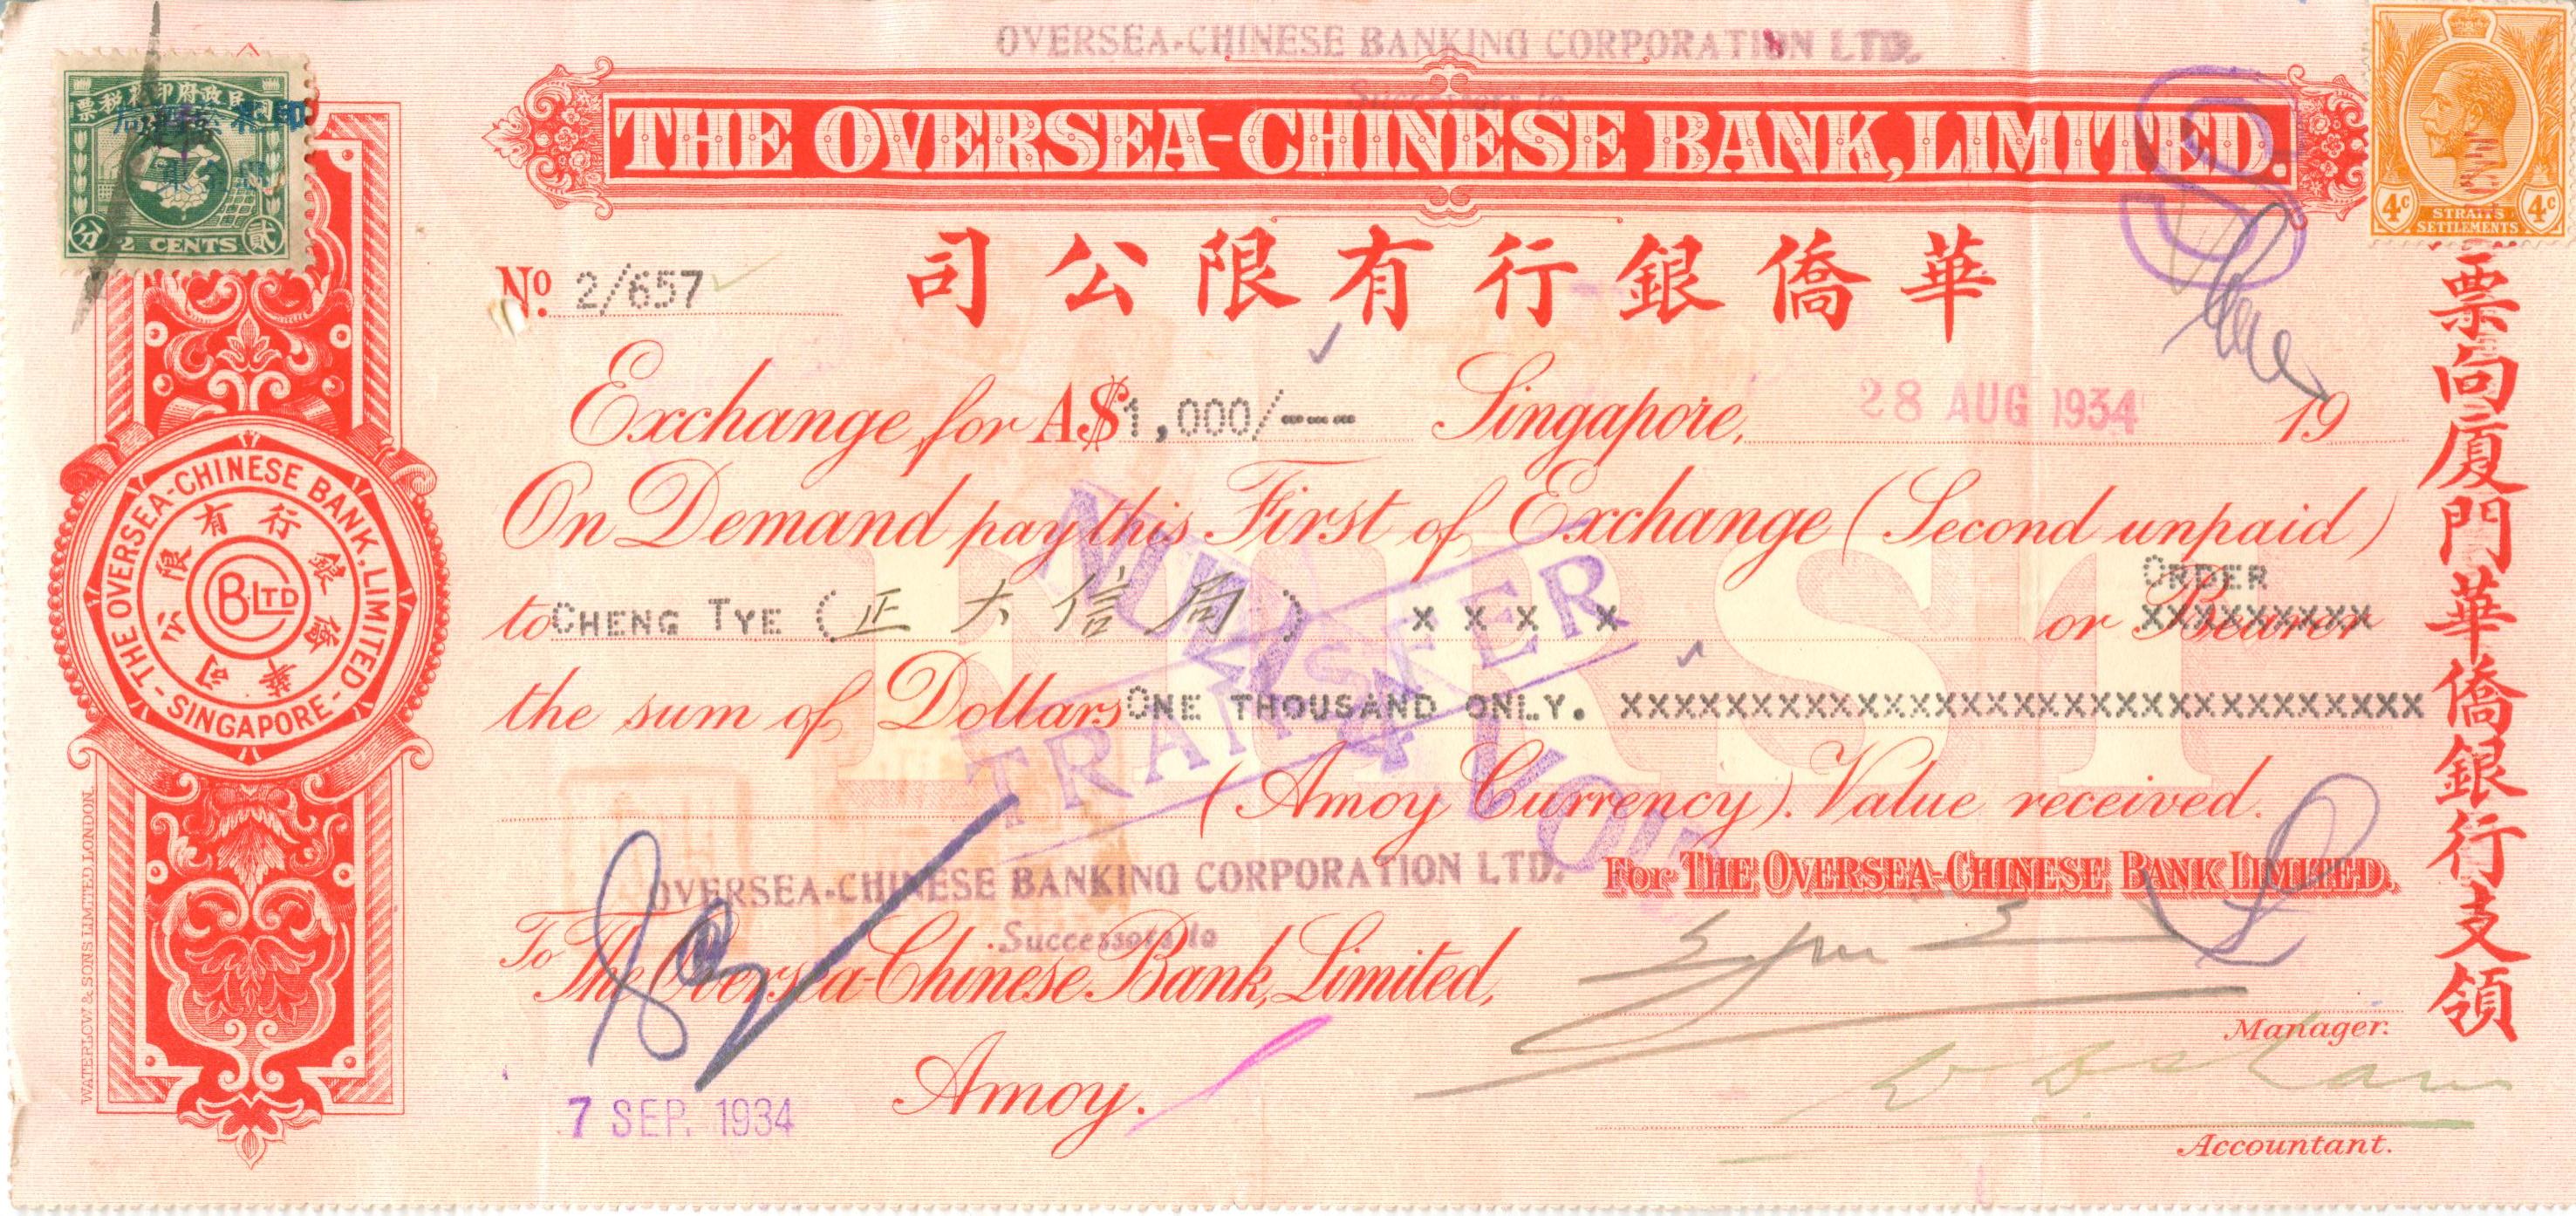 D2769, Check of Oversea-Chinese Bank Limited (Singapore), Cheque 1934